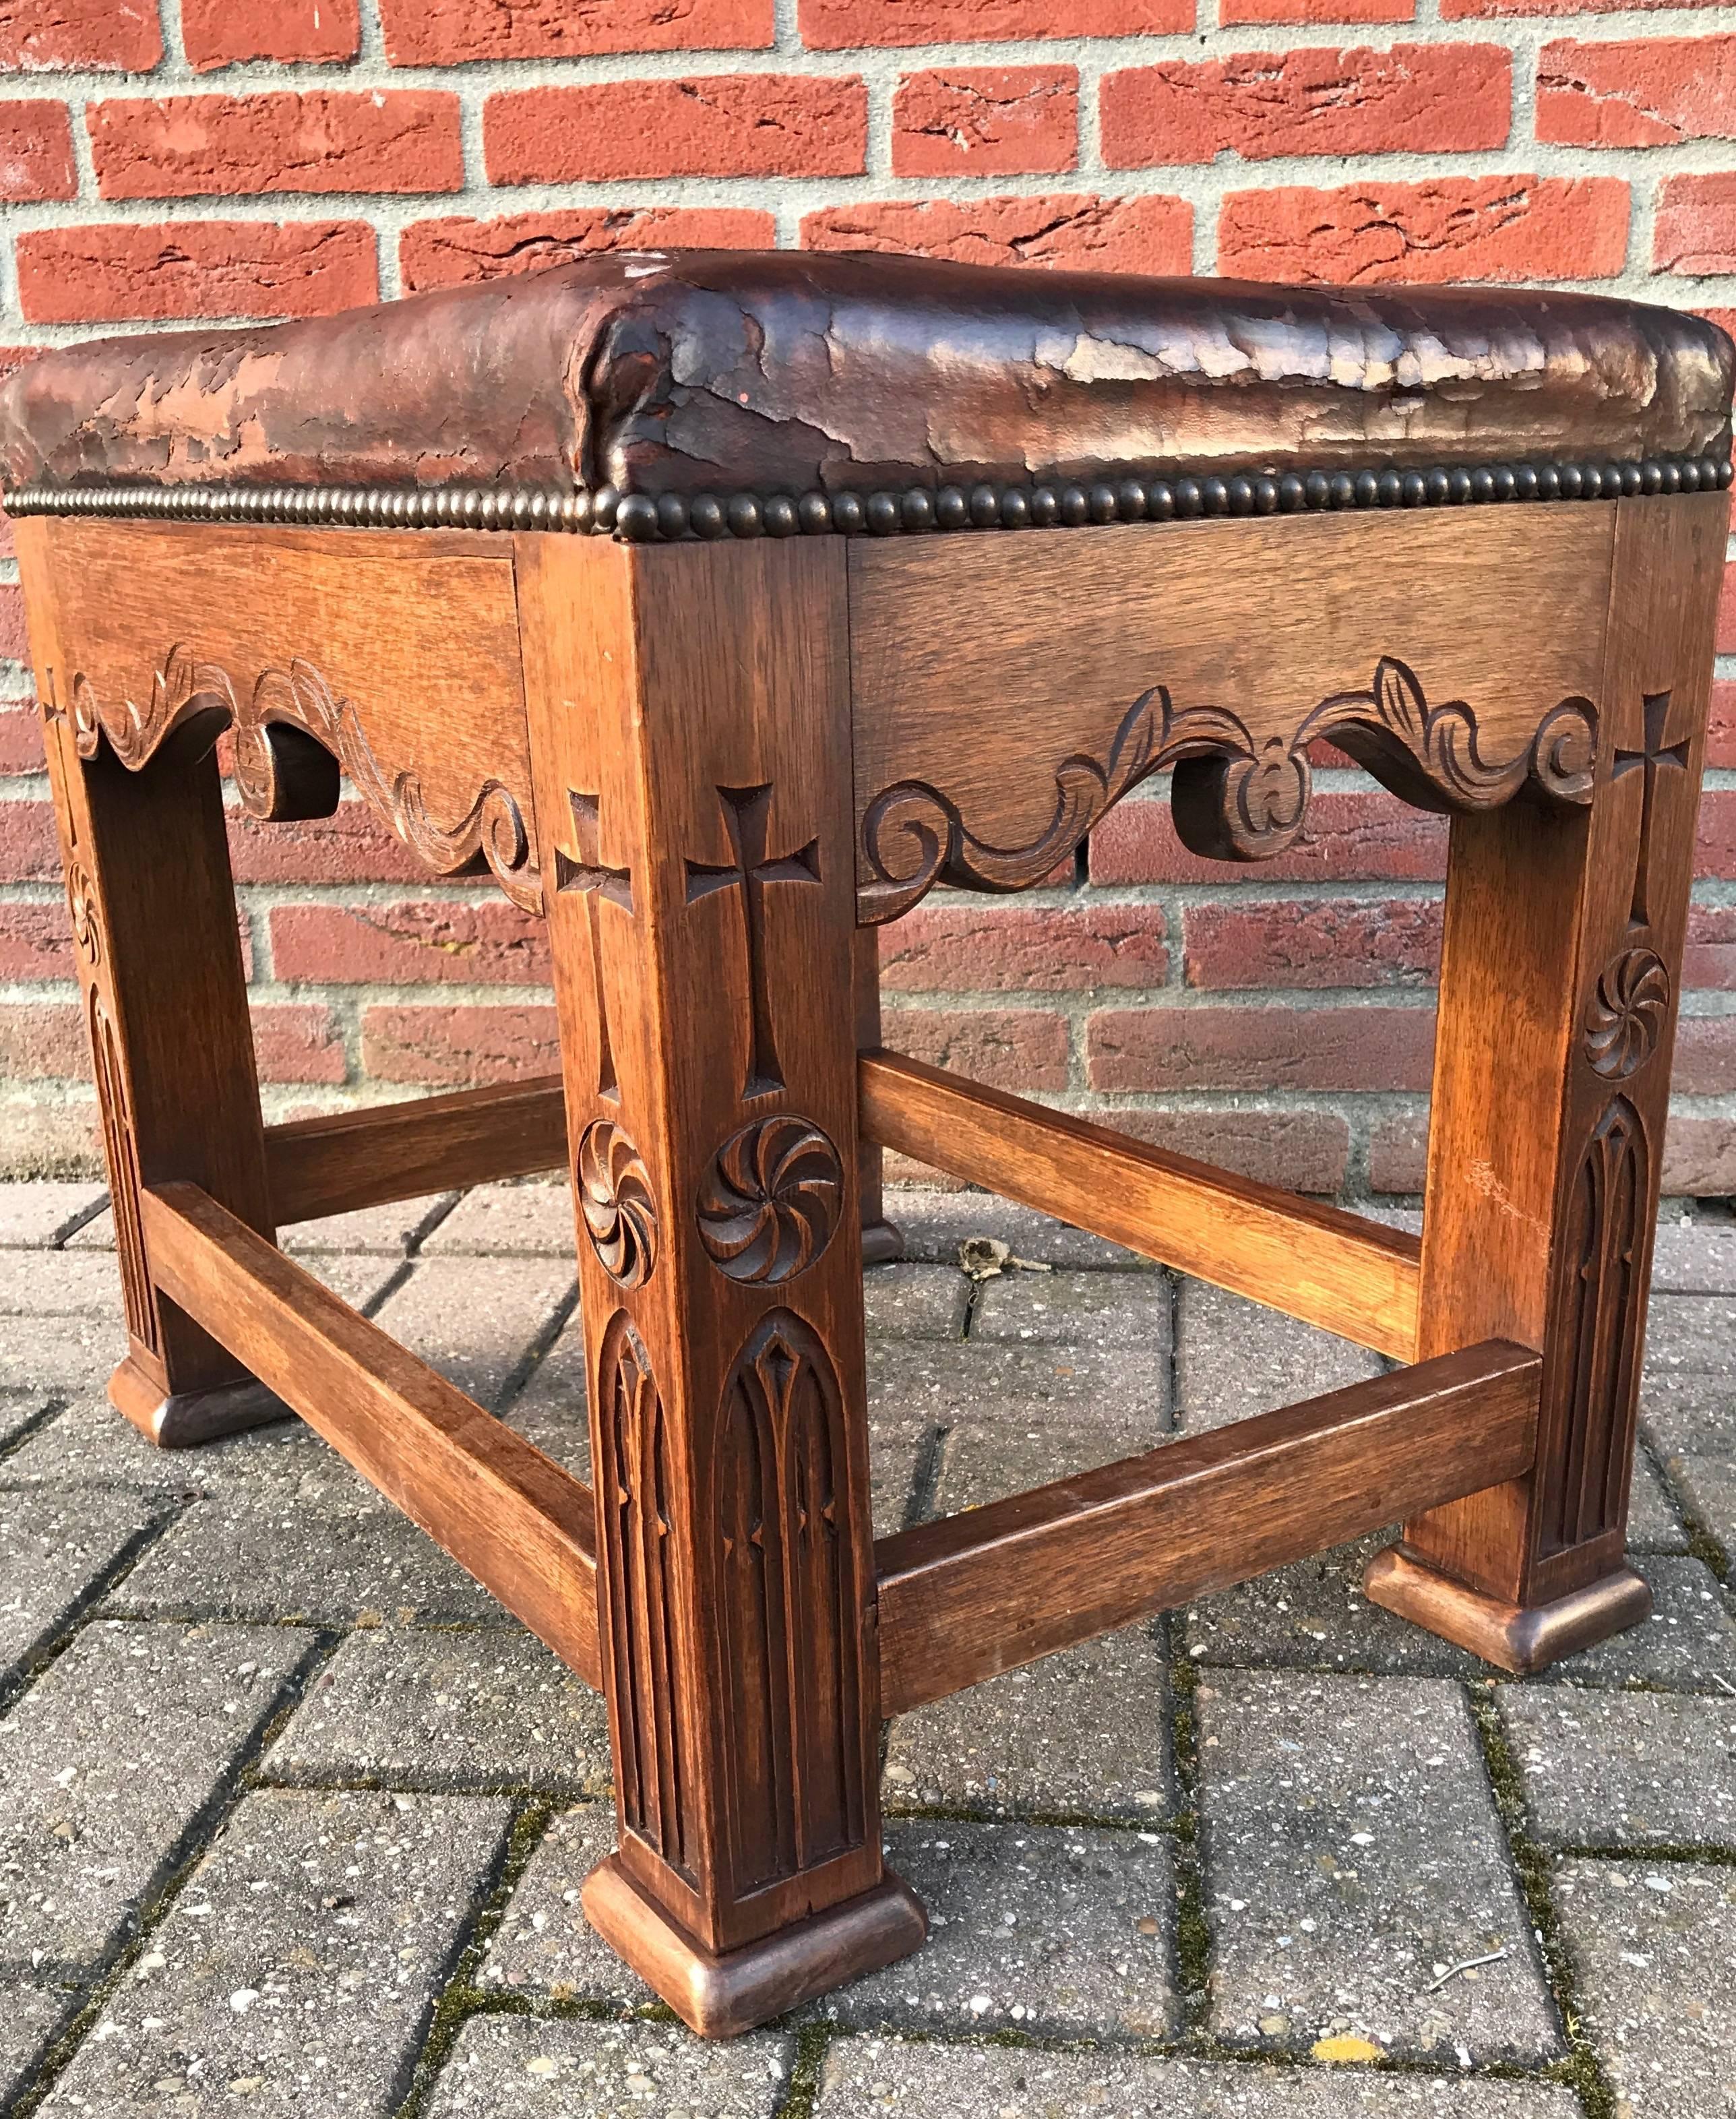 Stunning and practical Gothic stool from circa 1900.

This unique and sizeable Gothic stool is as stabile as the day it was made and the woodwork is in excellent condition. The solid oak frame comes with different quality carved Gothic elements